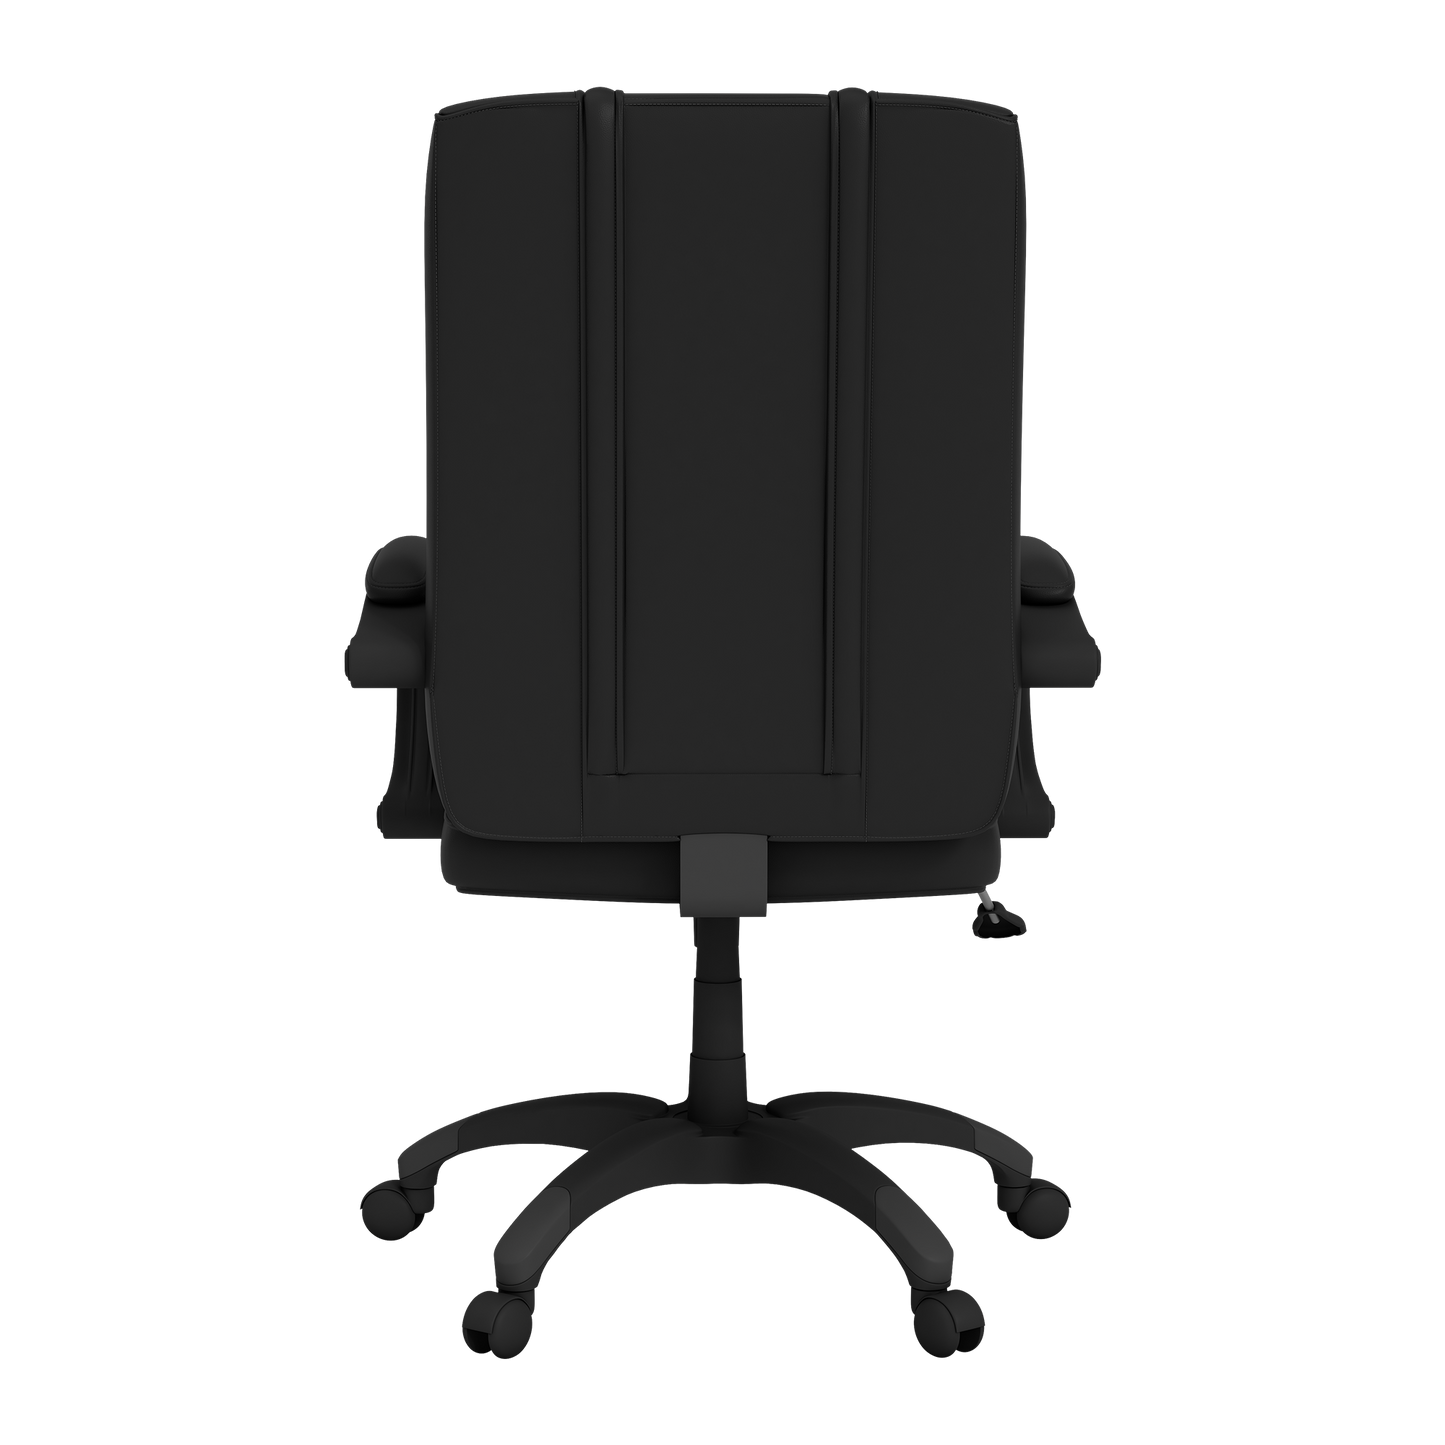 Office Chair 1000 with Atlanta United FC Logo